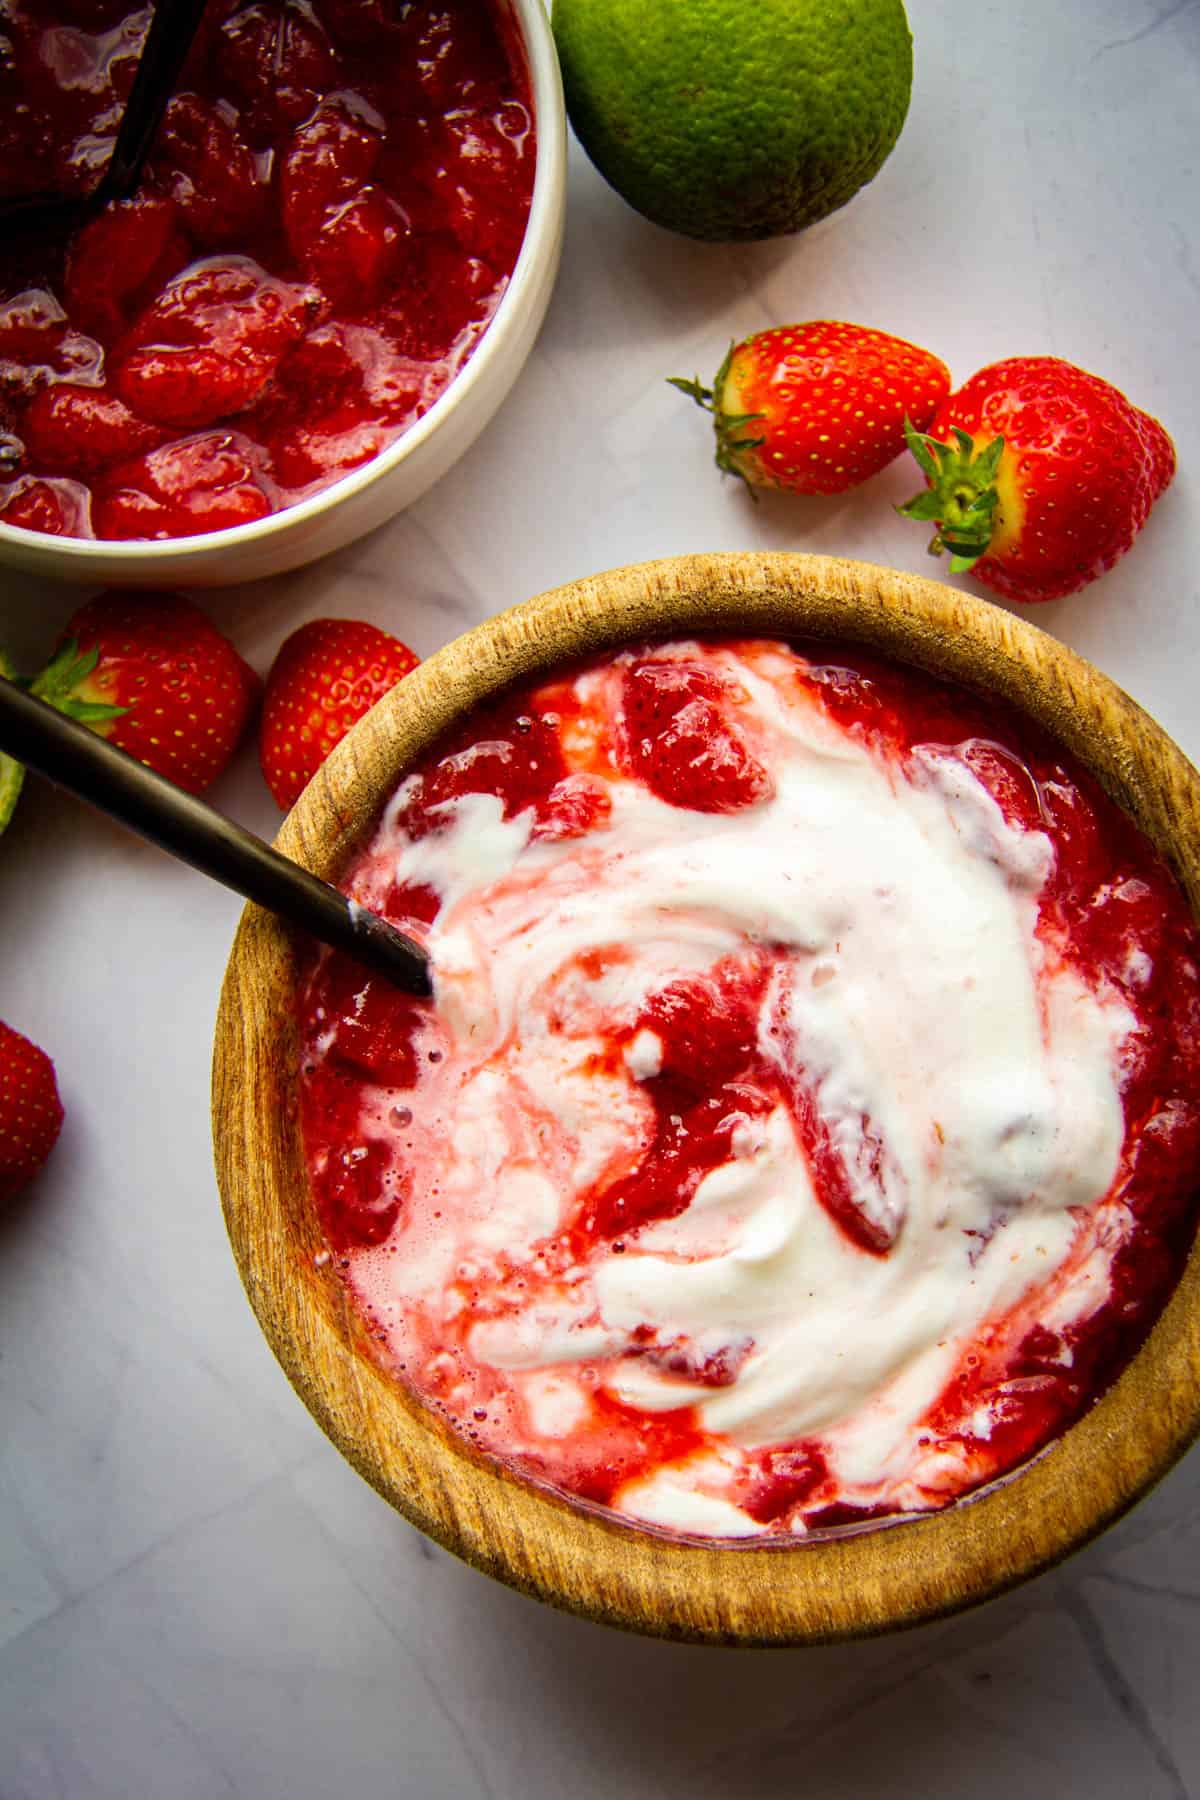 Strawberry sauce with yogurt mixed together.